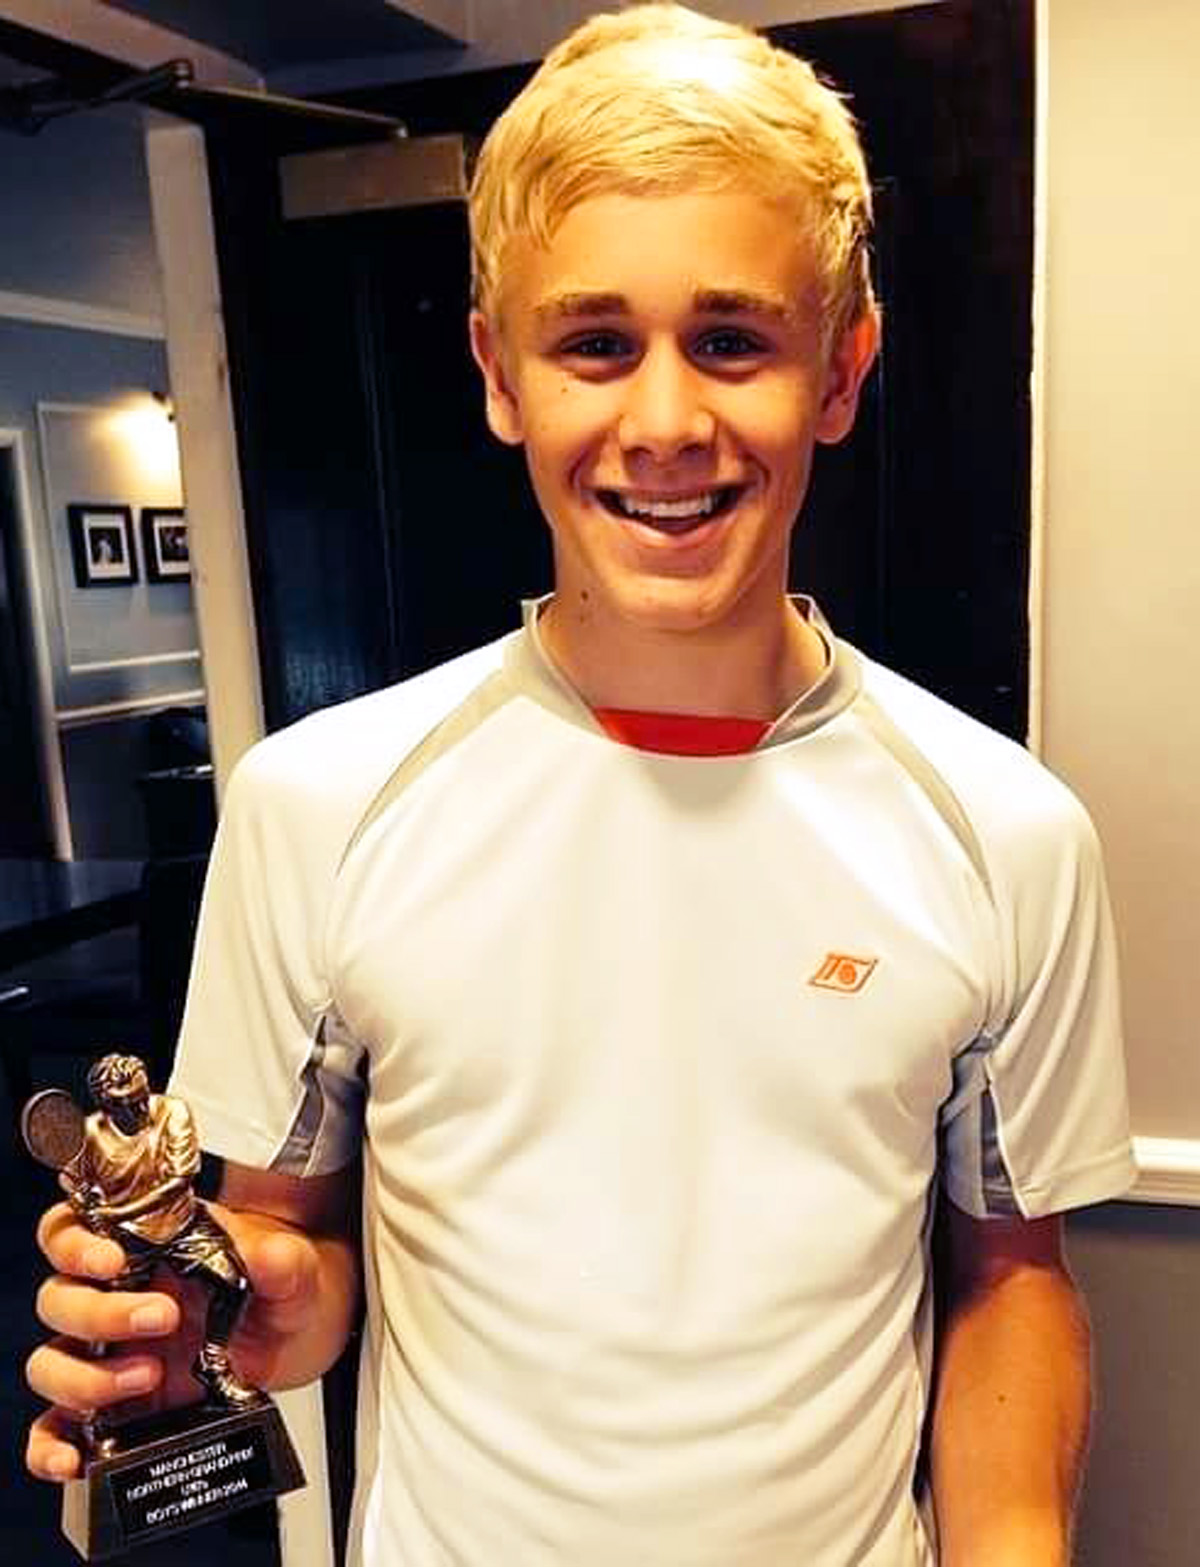 Conor Tordoff, a young, rising British tennis player, is one of the people interviewed in the Reach Beyond-UK radio feature on Wimbledon.